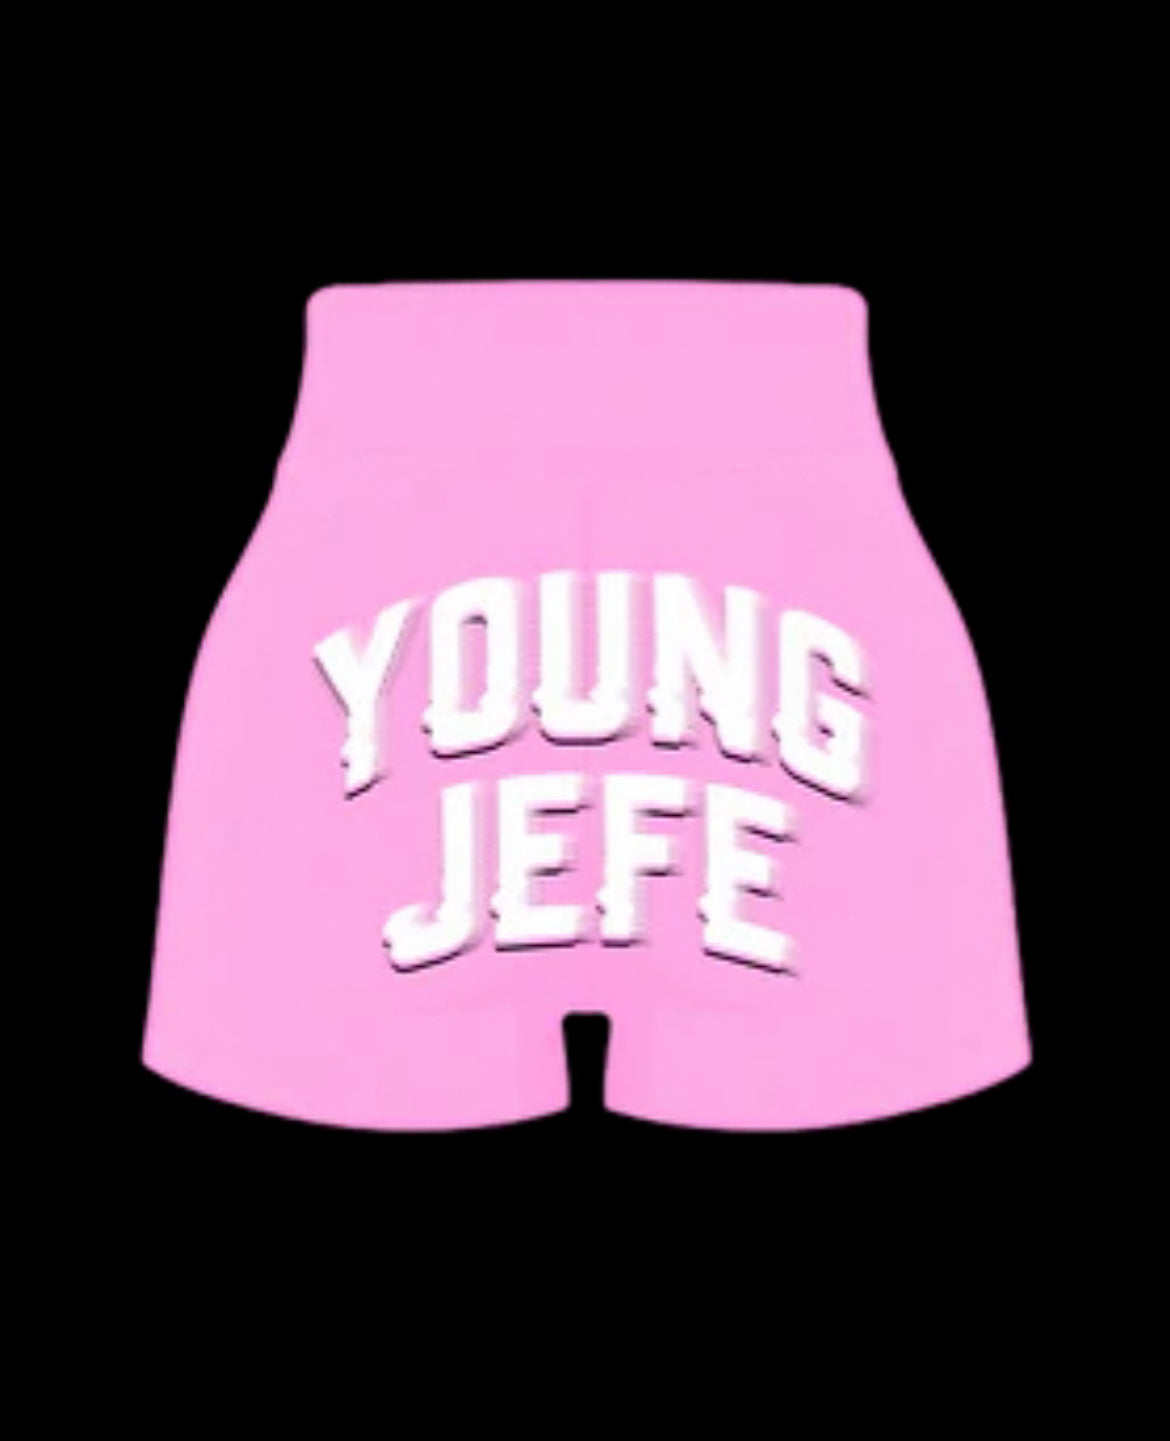 NEW “YOUNG JEFE” Biker Shorts (Pre-Order)